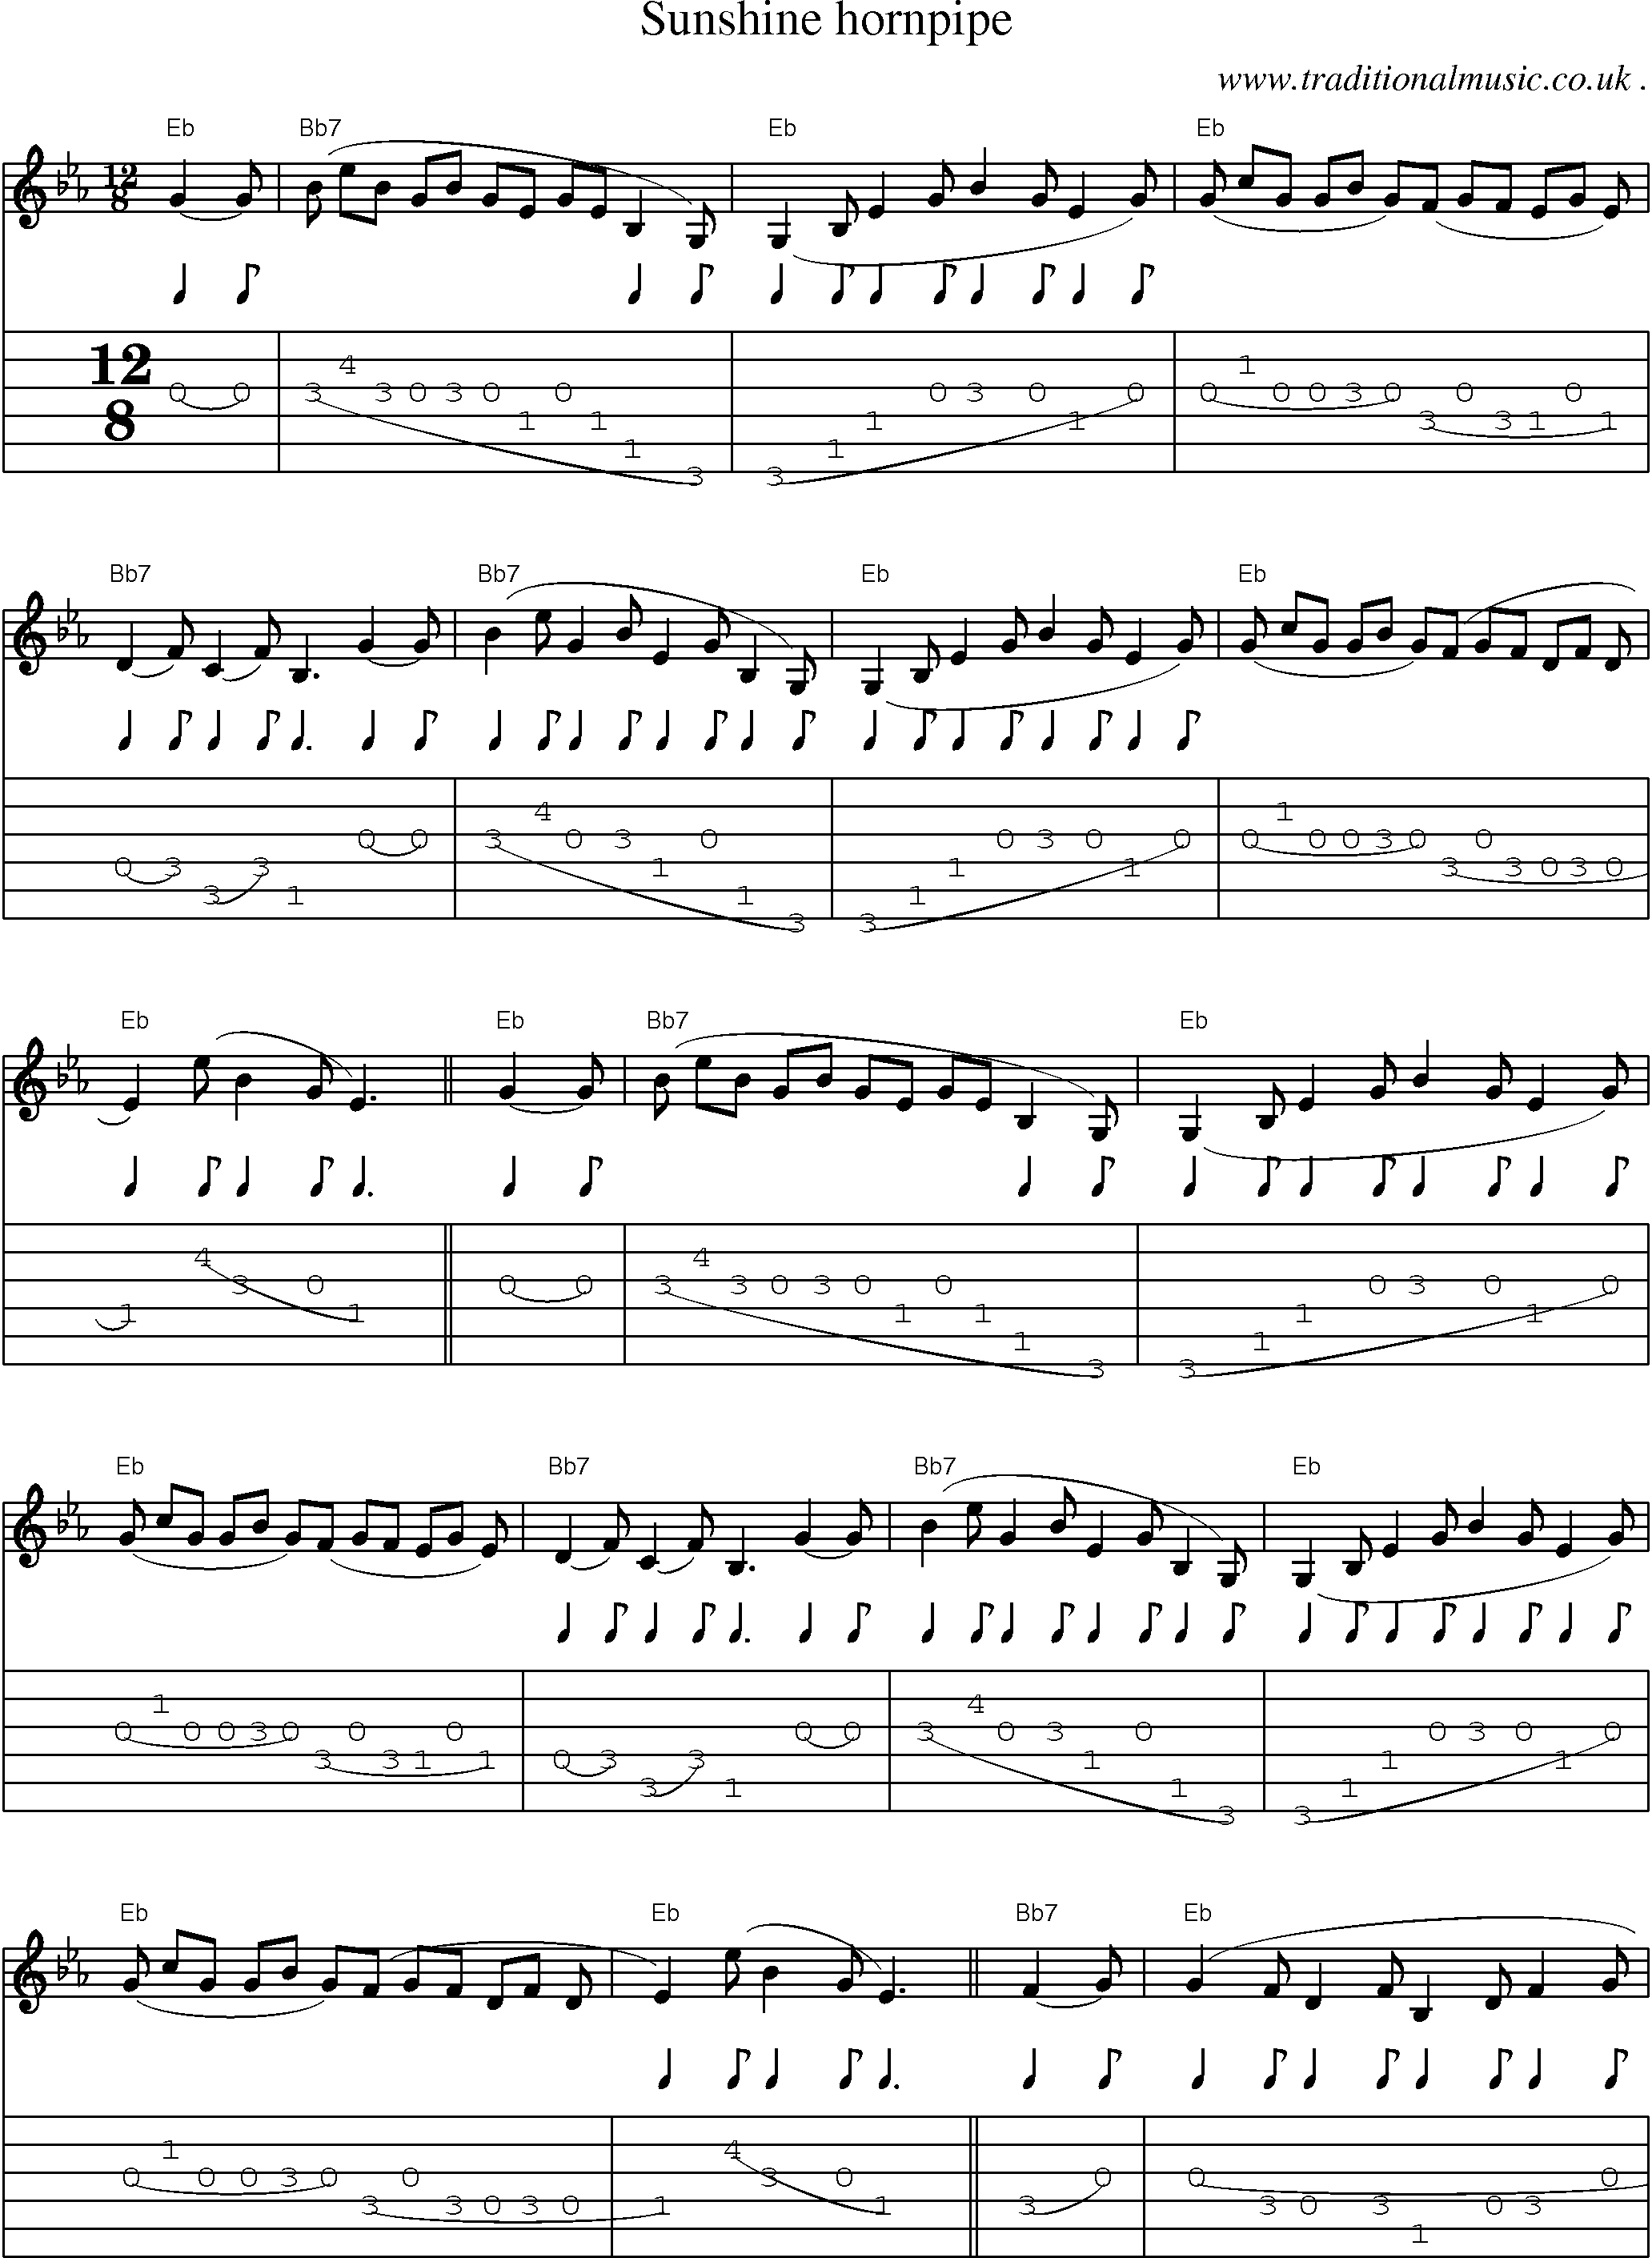 Sheet-Music and Guitar Tabs for Sunshine Hornpipe